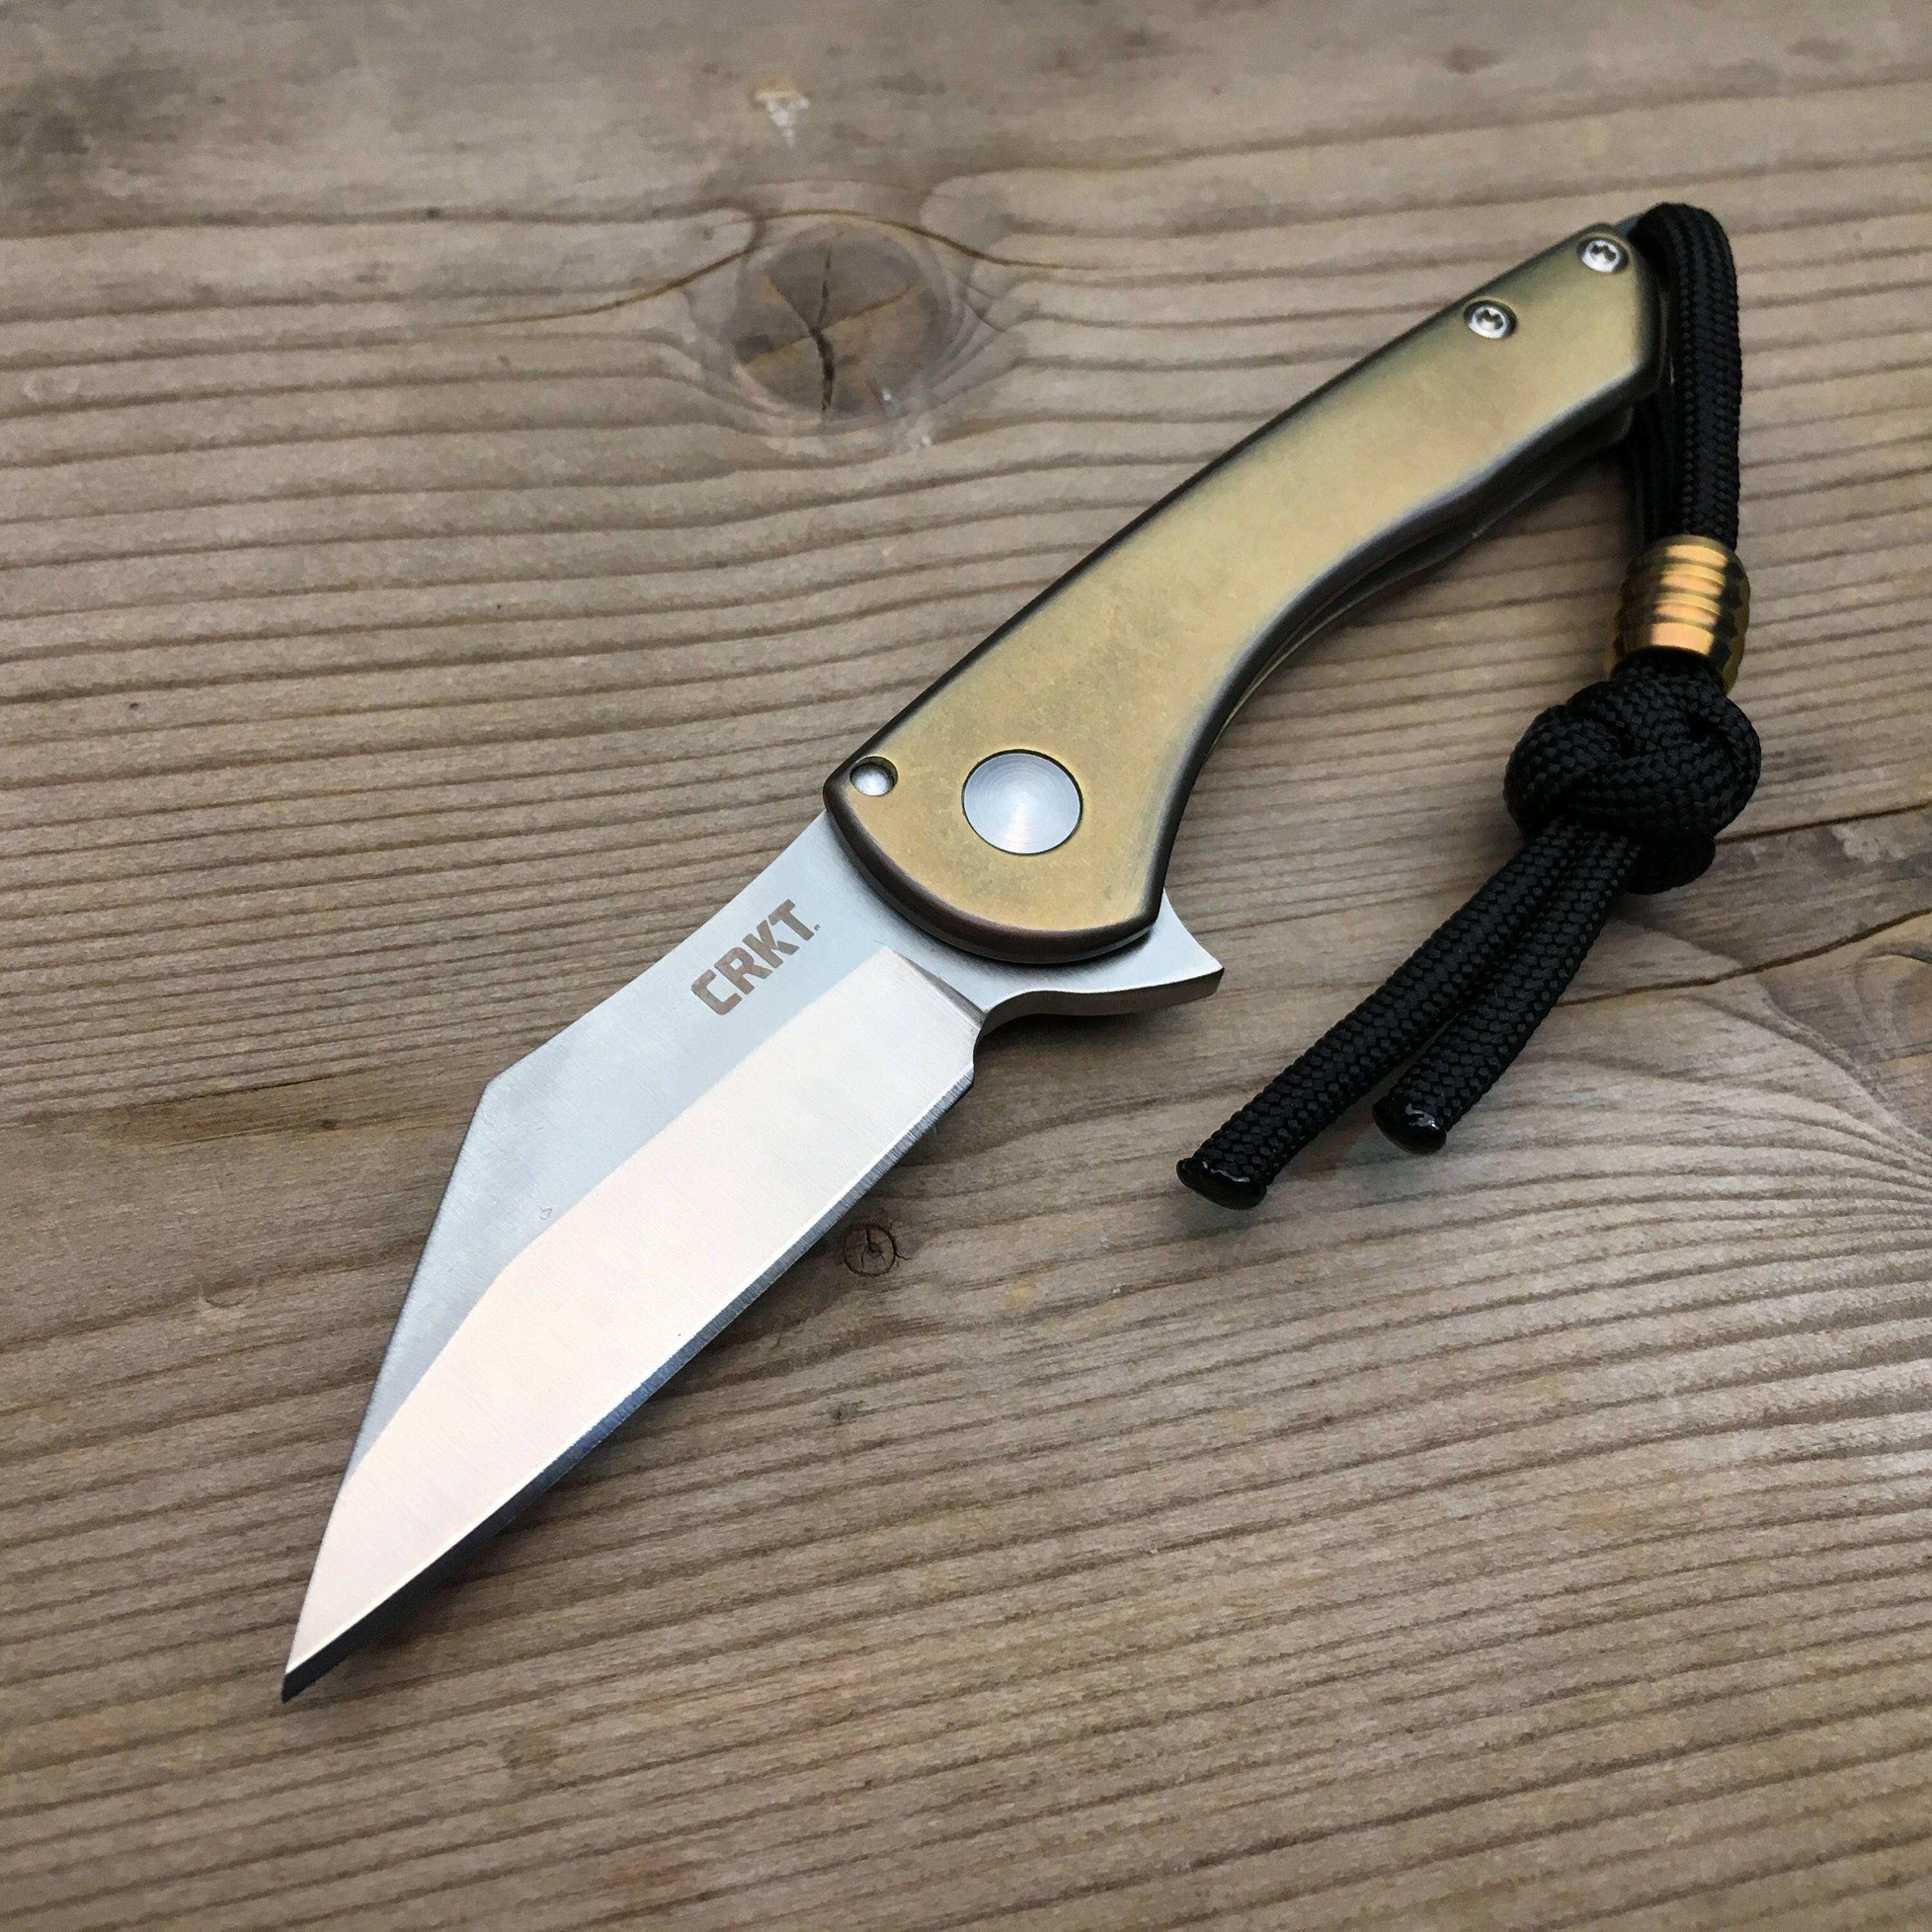 crkt jettison compact